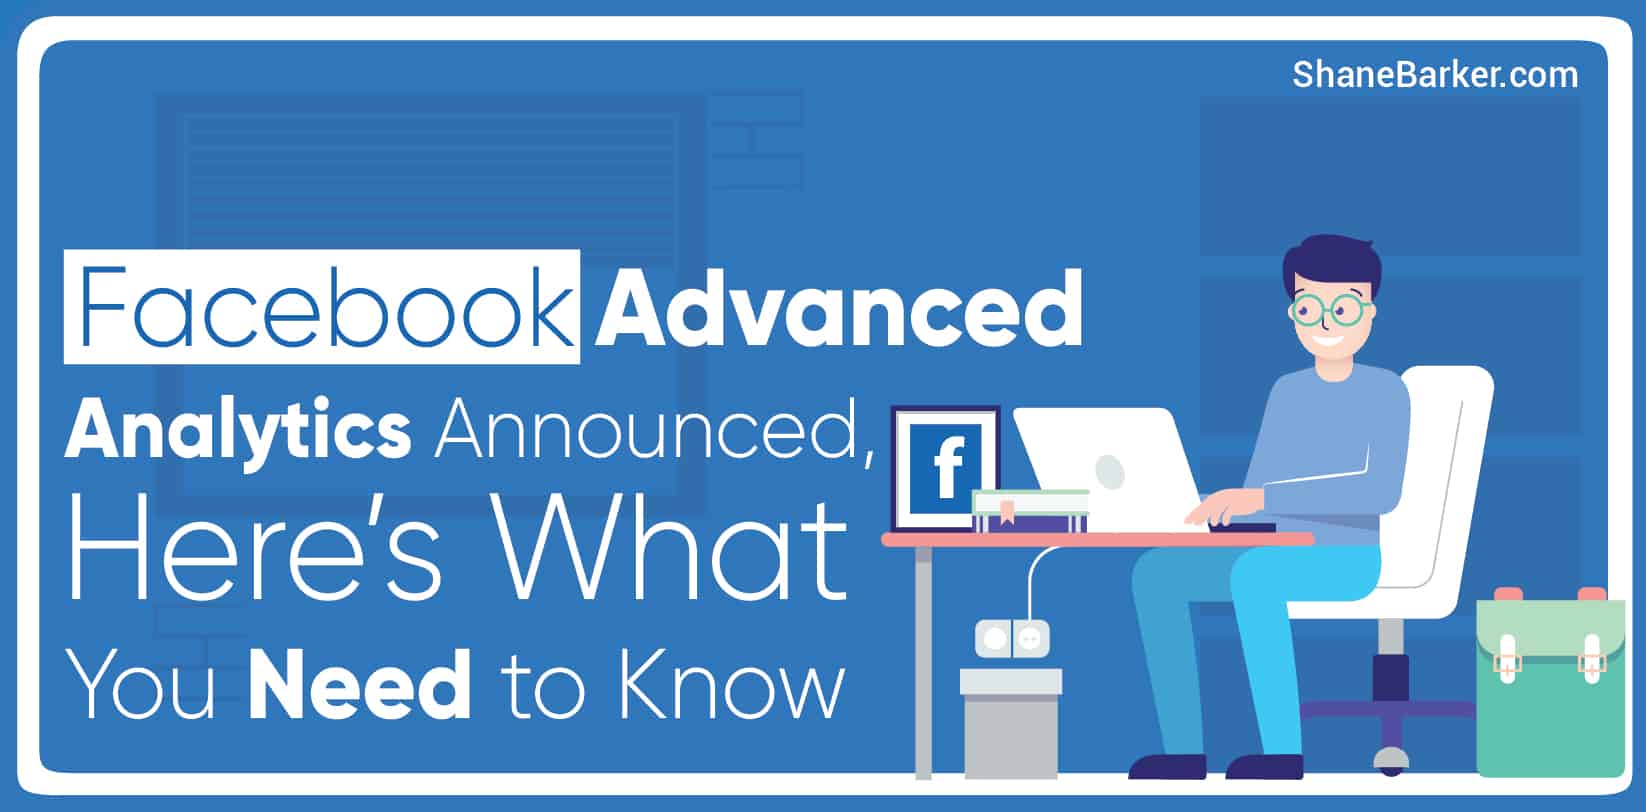 Facebook Advanced Analytics Announced, Here’s What You Need to Know